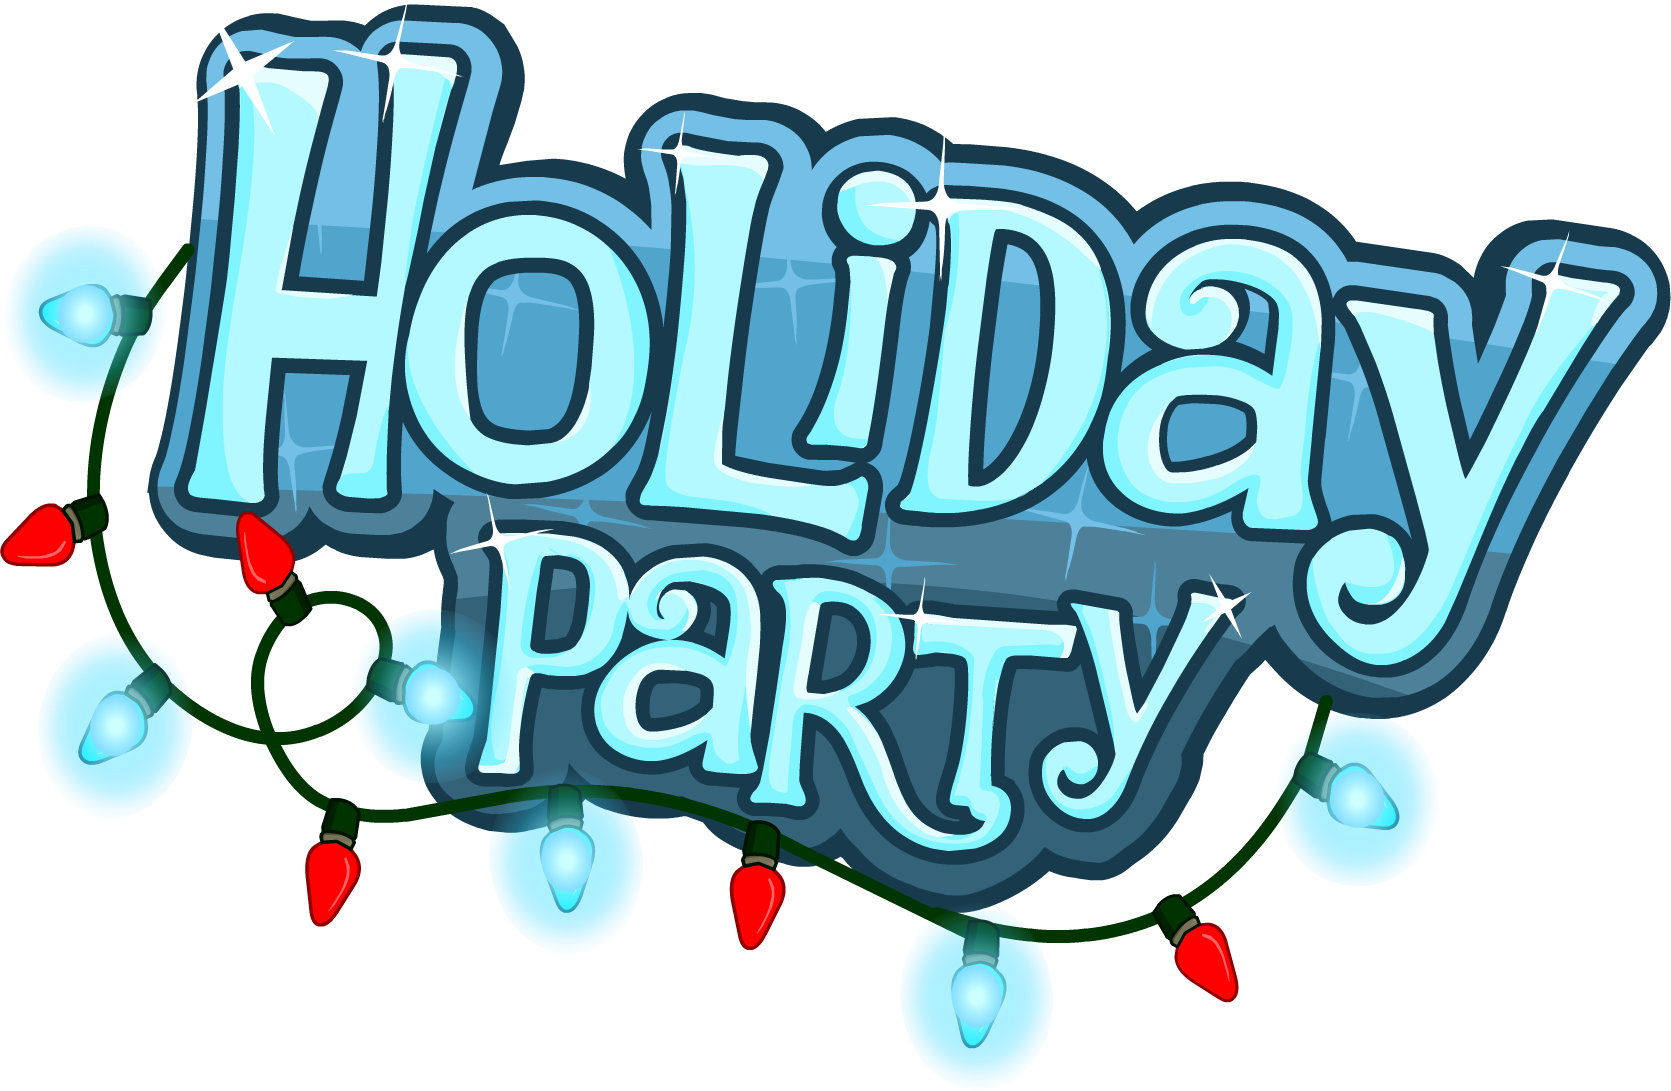 Party out sober minnesota. Volunteering clipart holiday